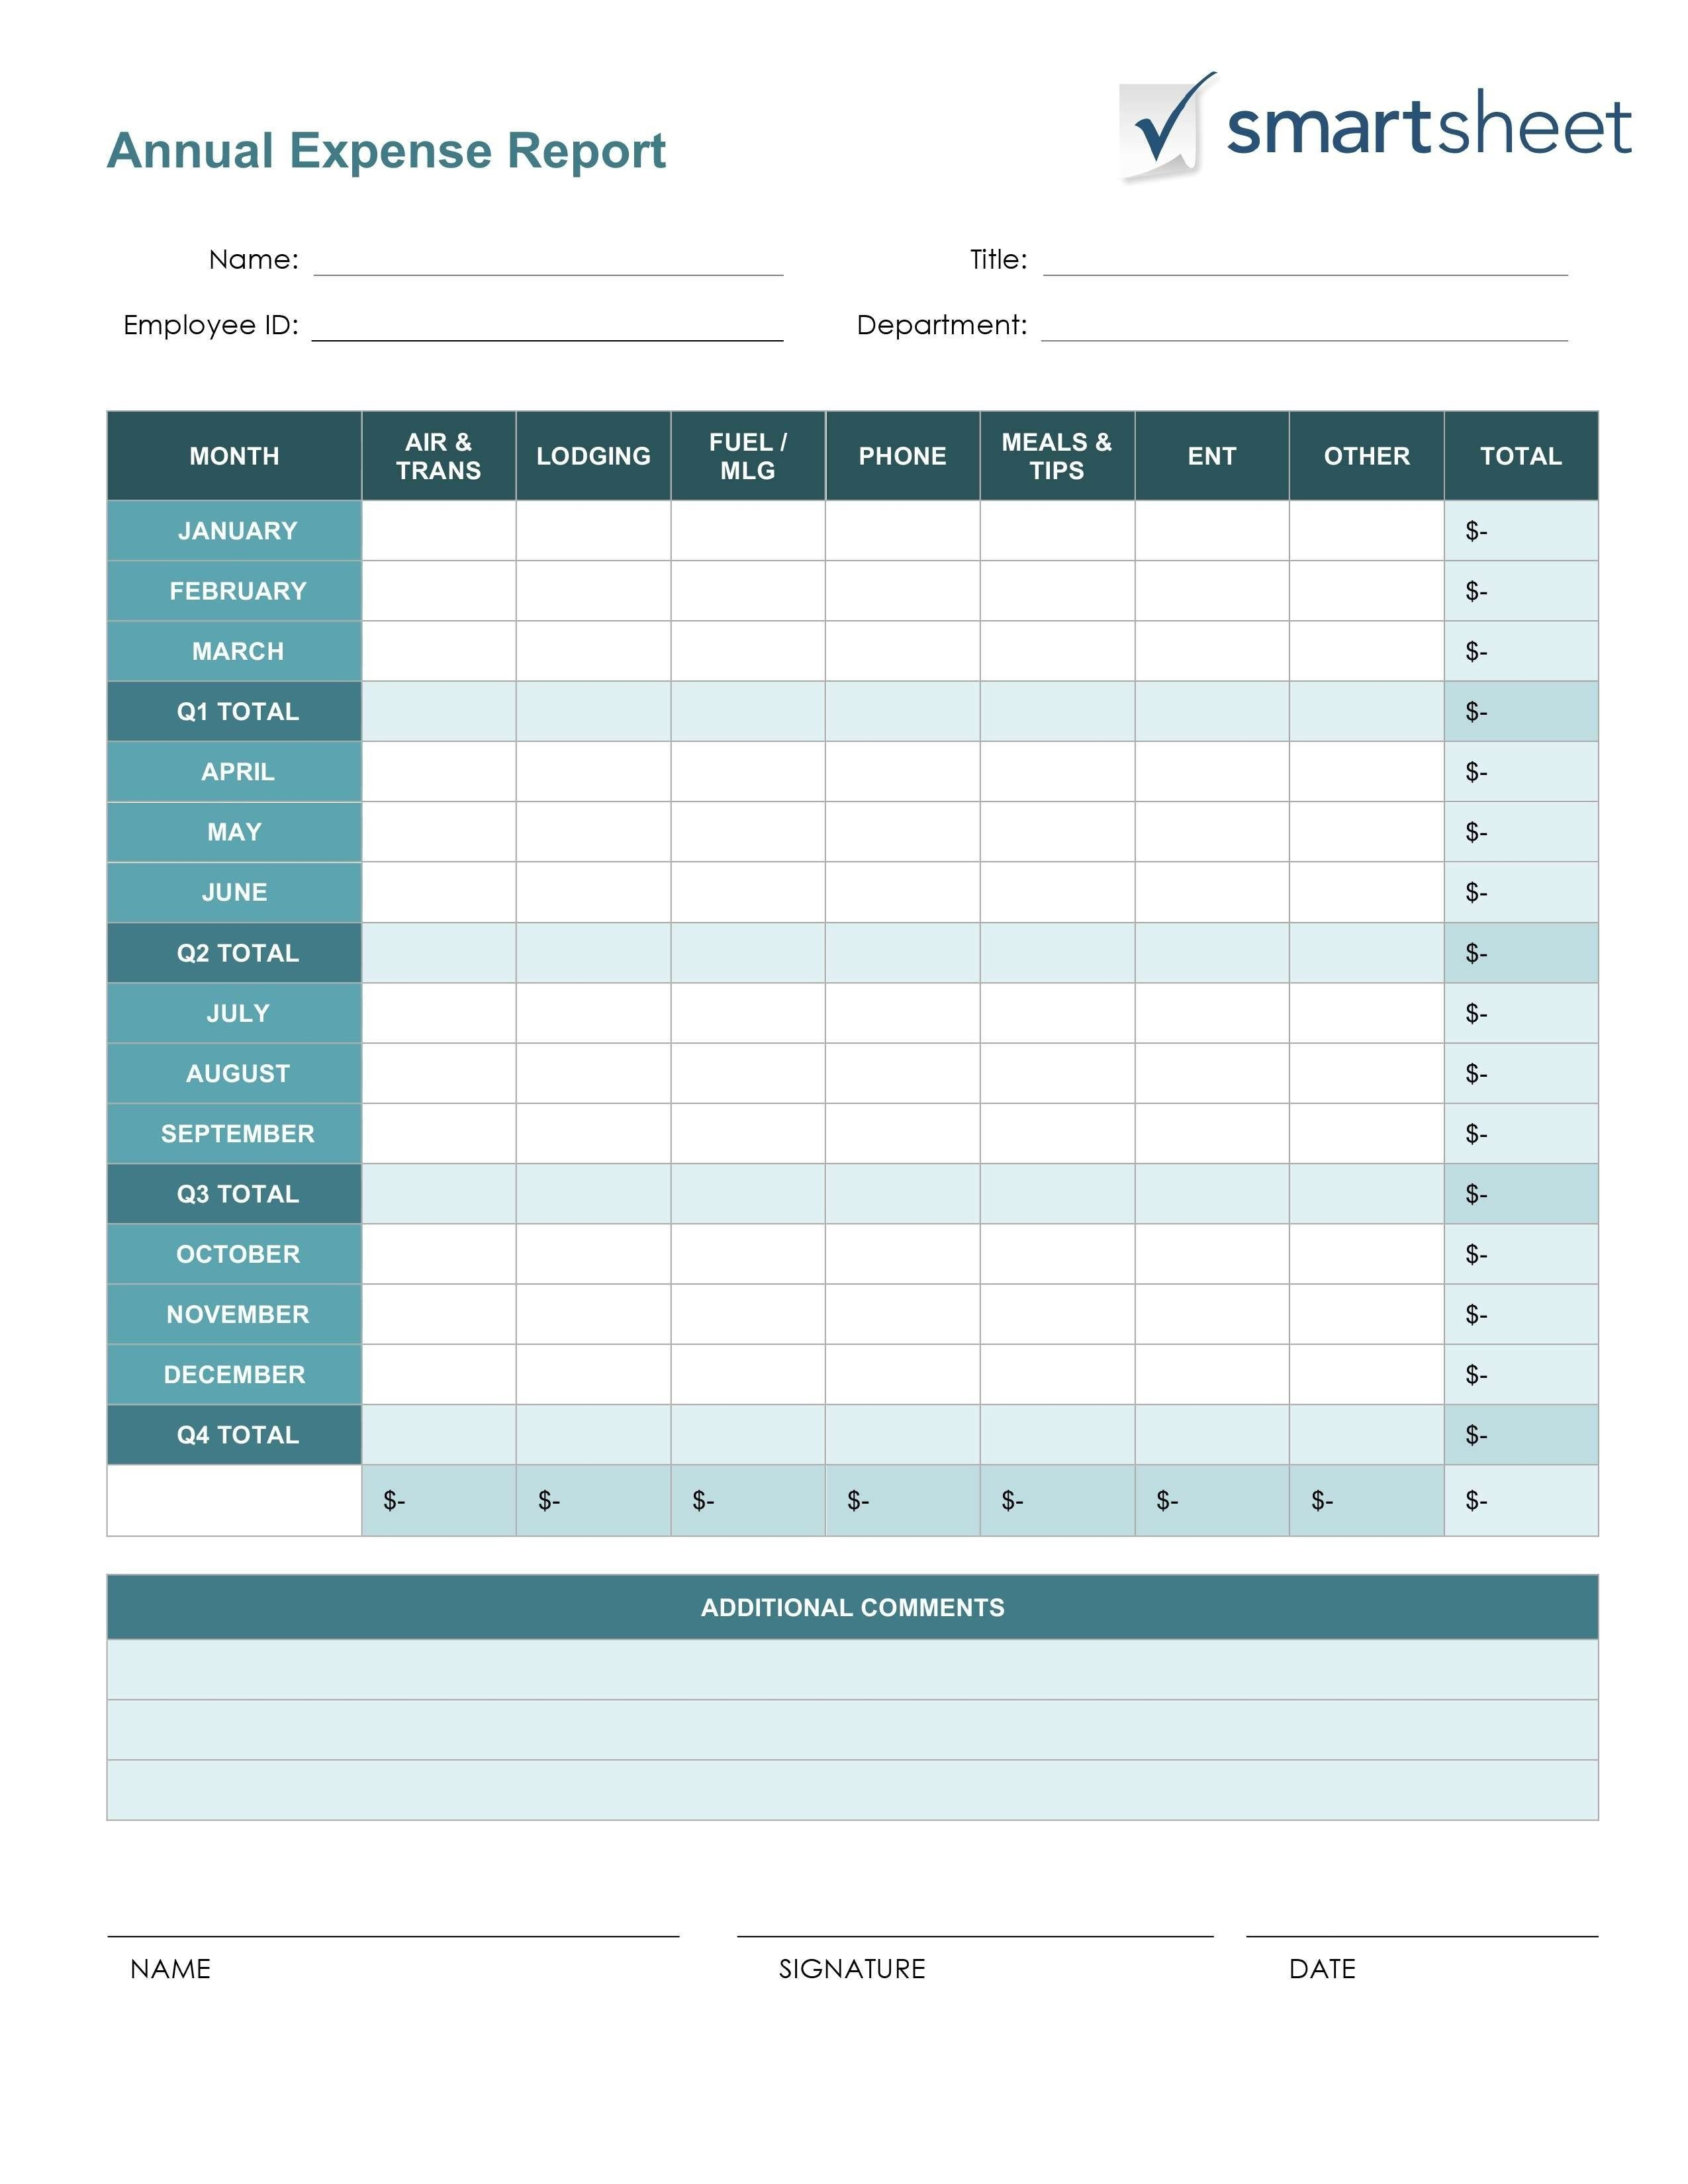 New Expenses Excel #exceltemplate #xls #xlstemplate With Monthly Expense Report Template Excel